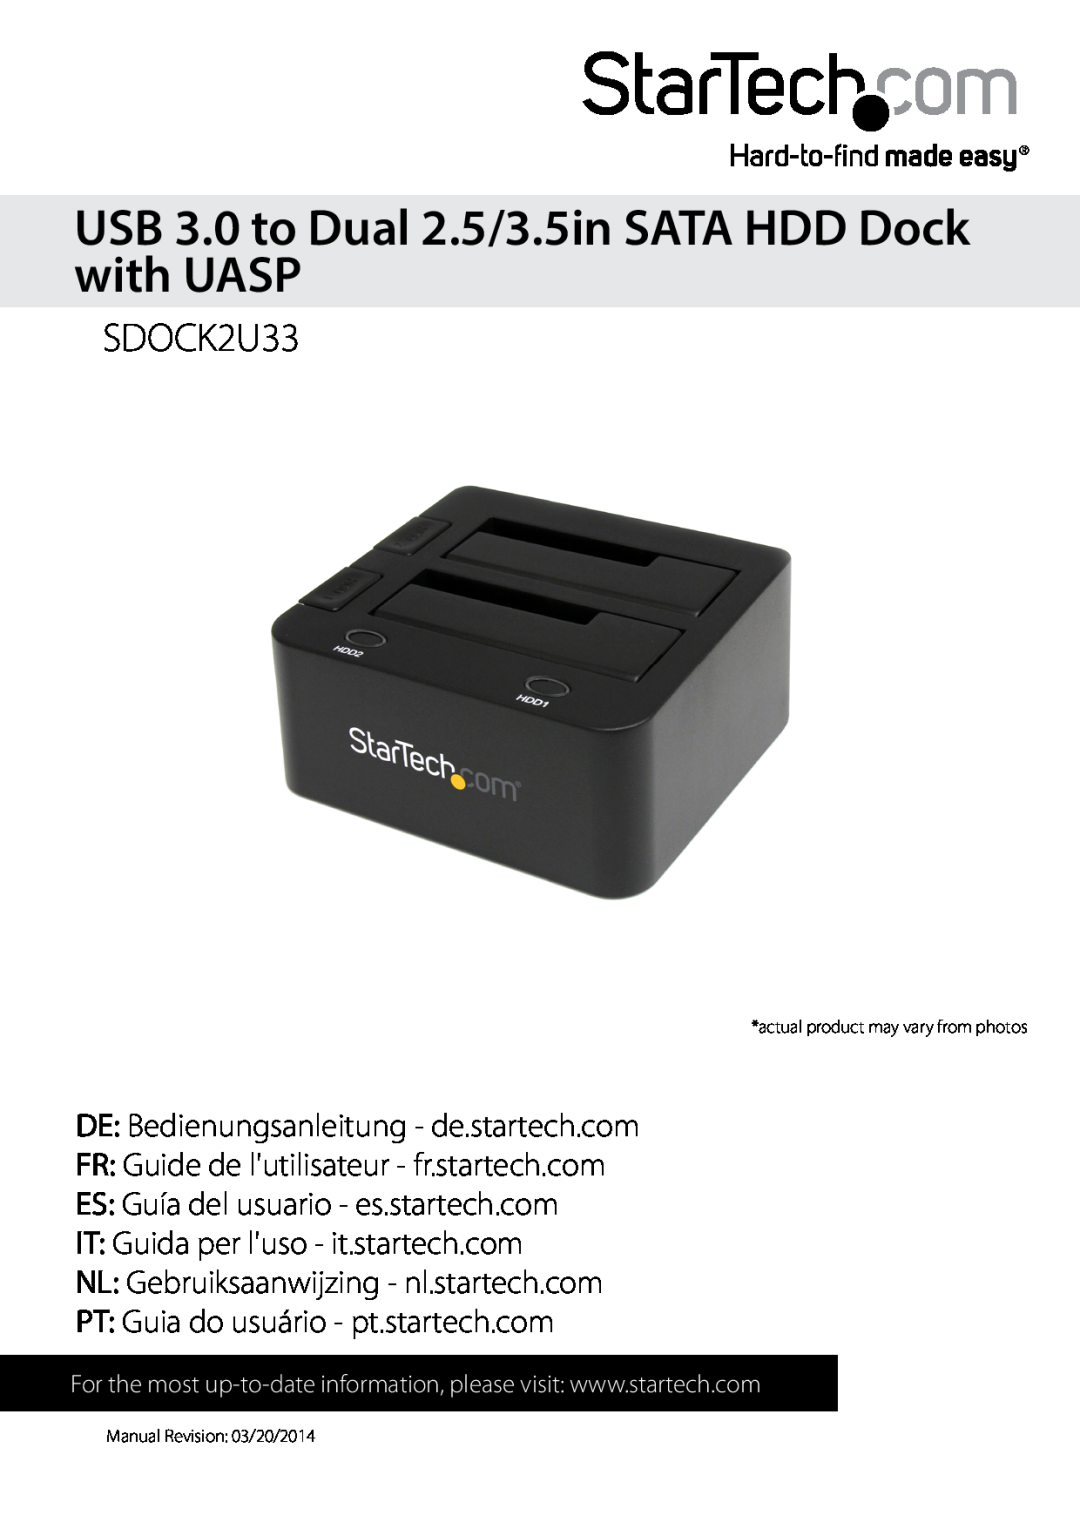 StarTech.com usb 3.0 to dual 2.5/3.5in sata hdd dock with uasp manual USB 3.0 to Dual 2.5/3.5in SATA HDD Dock with UASP 